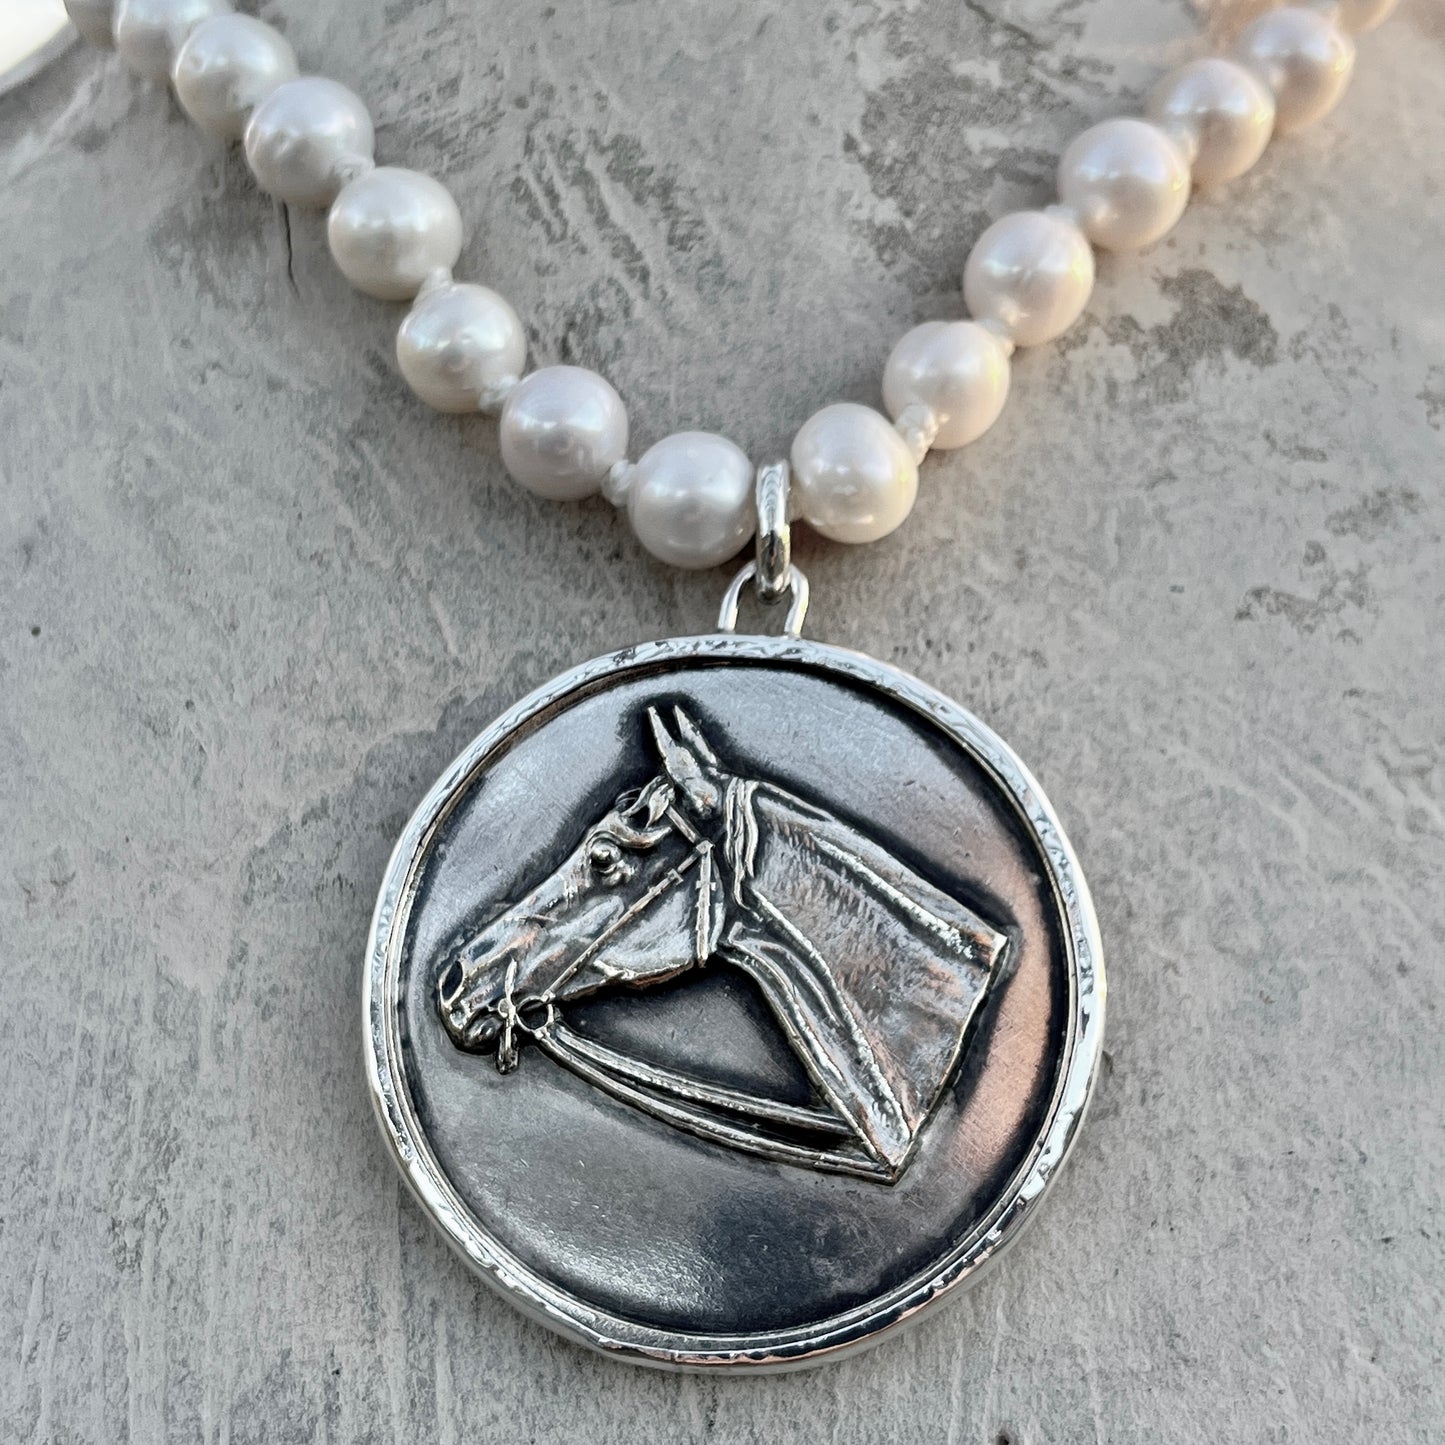 Vintage Horse Head Medal on Pearl Necklace